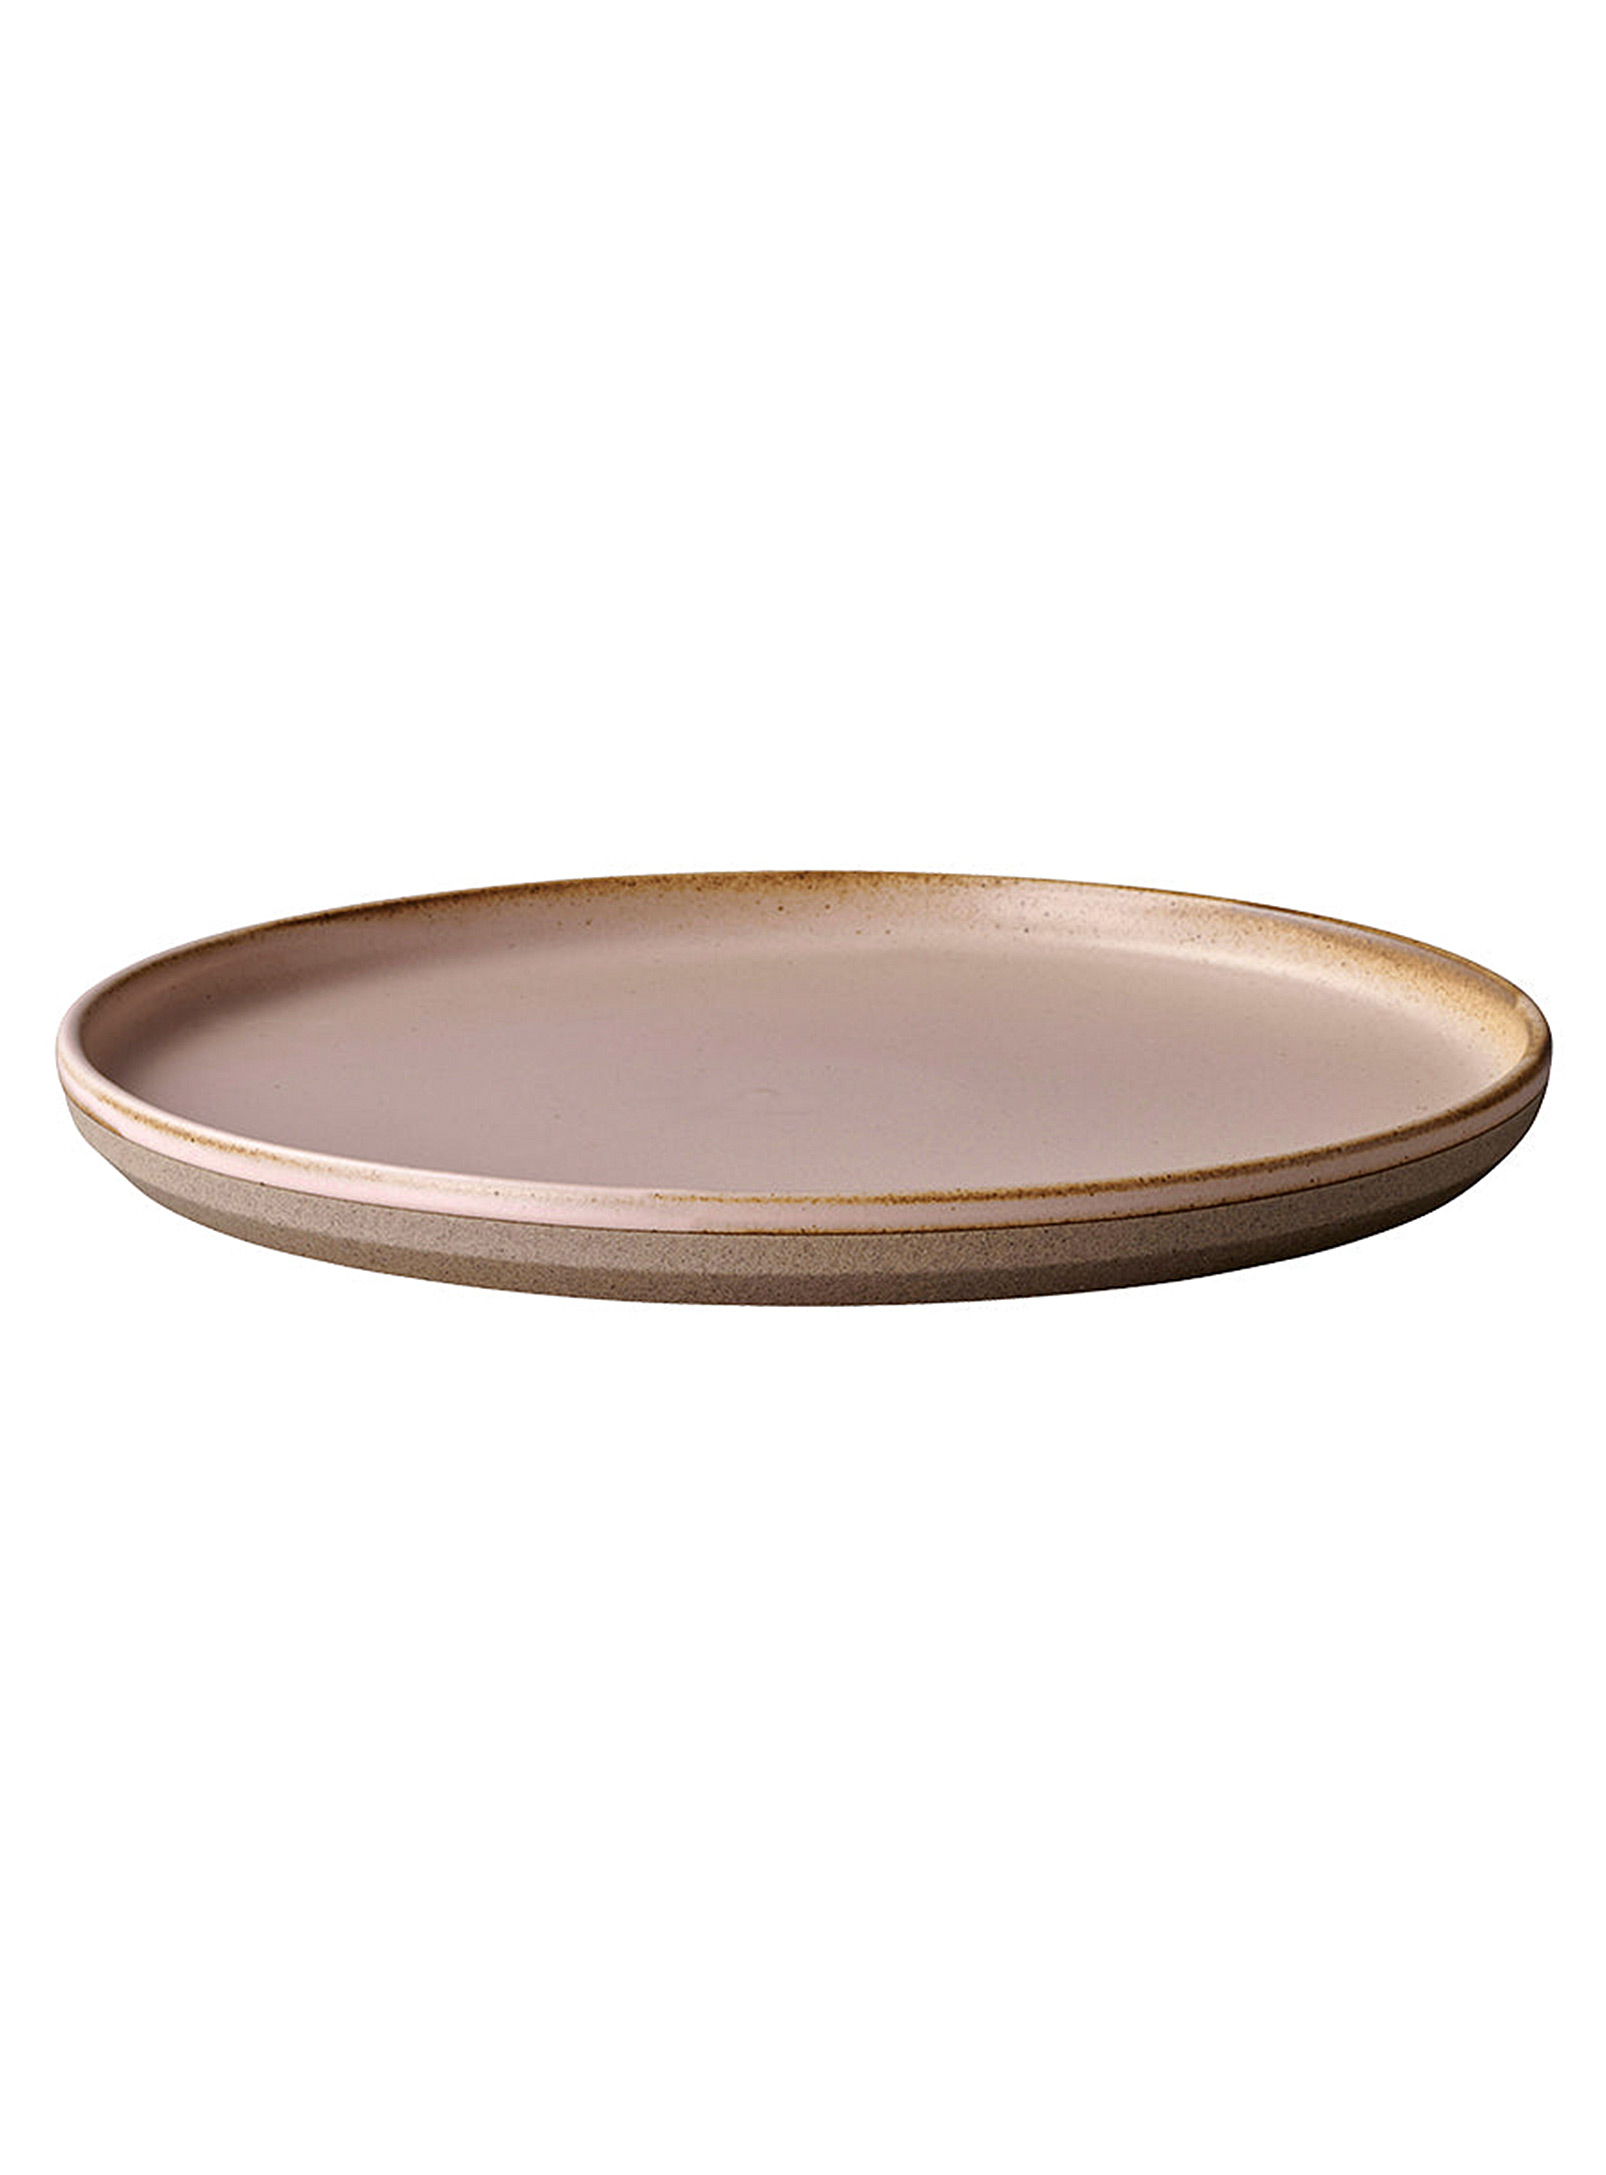 Kinto Two-tone Porcelain Plates Set Of 3 In Dusky Pink